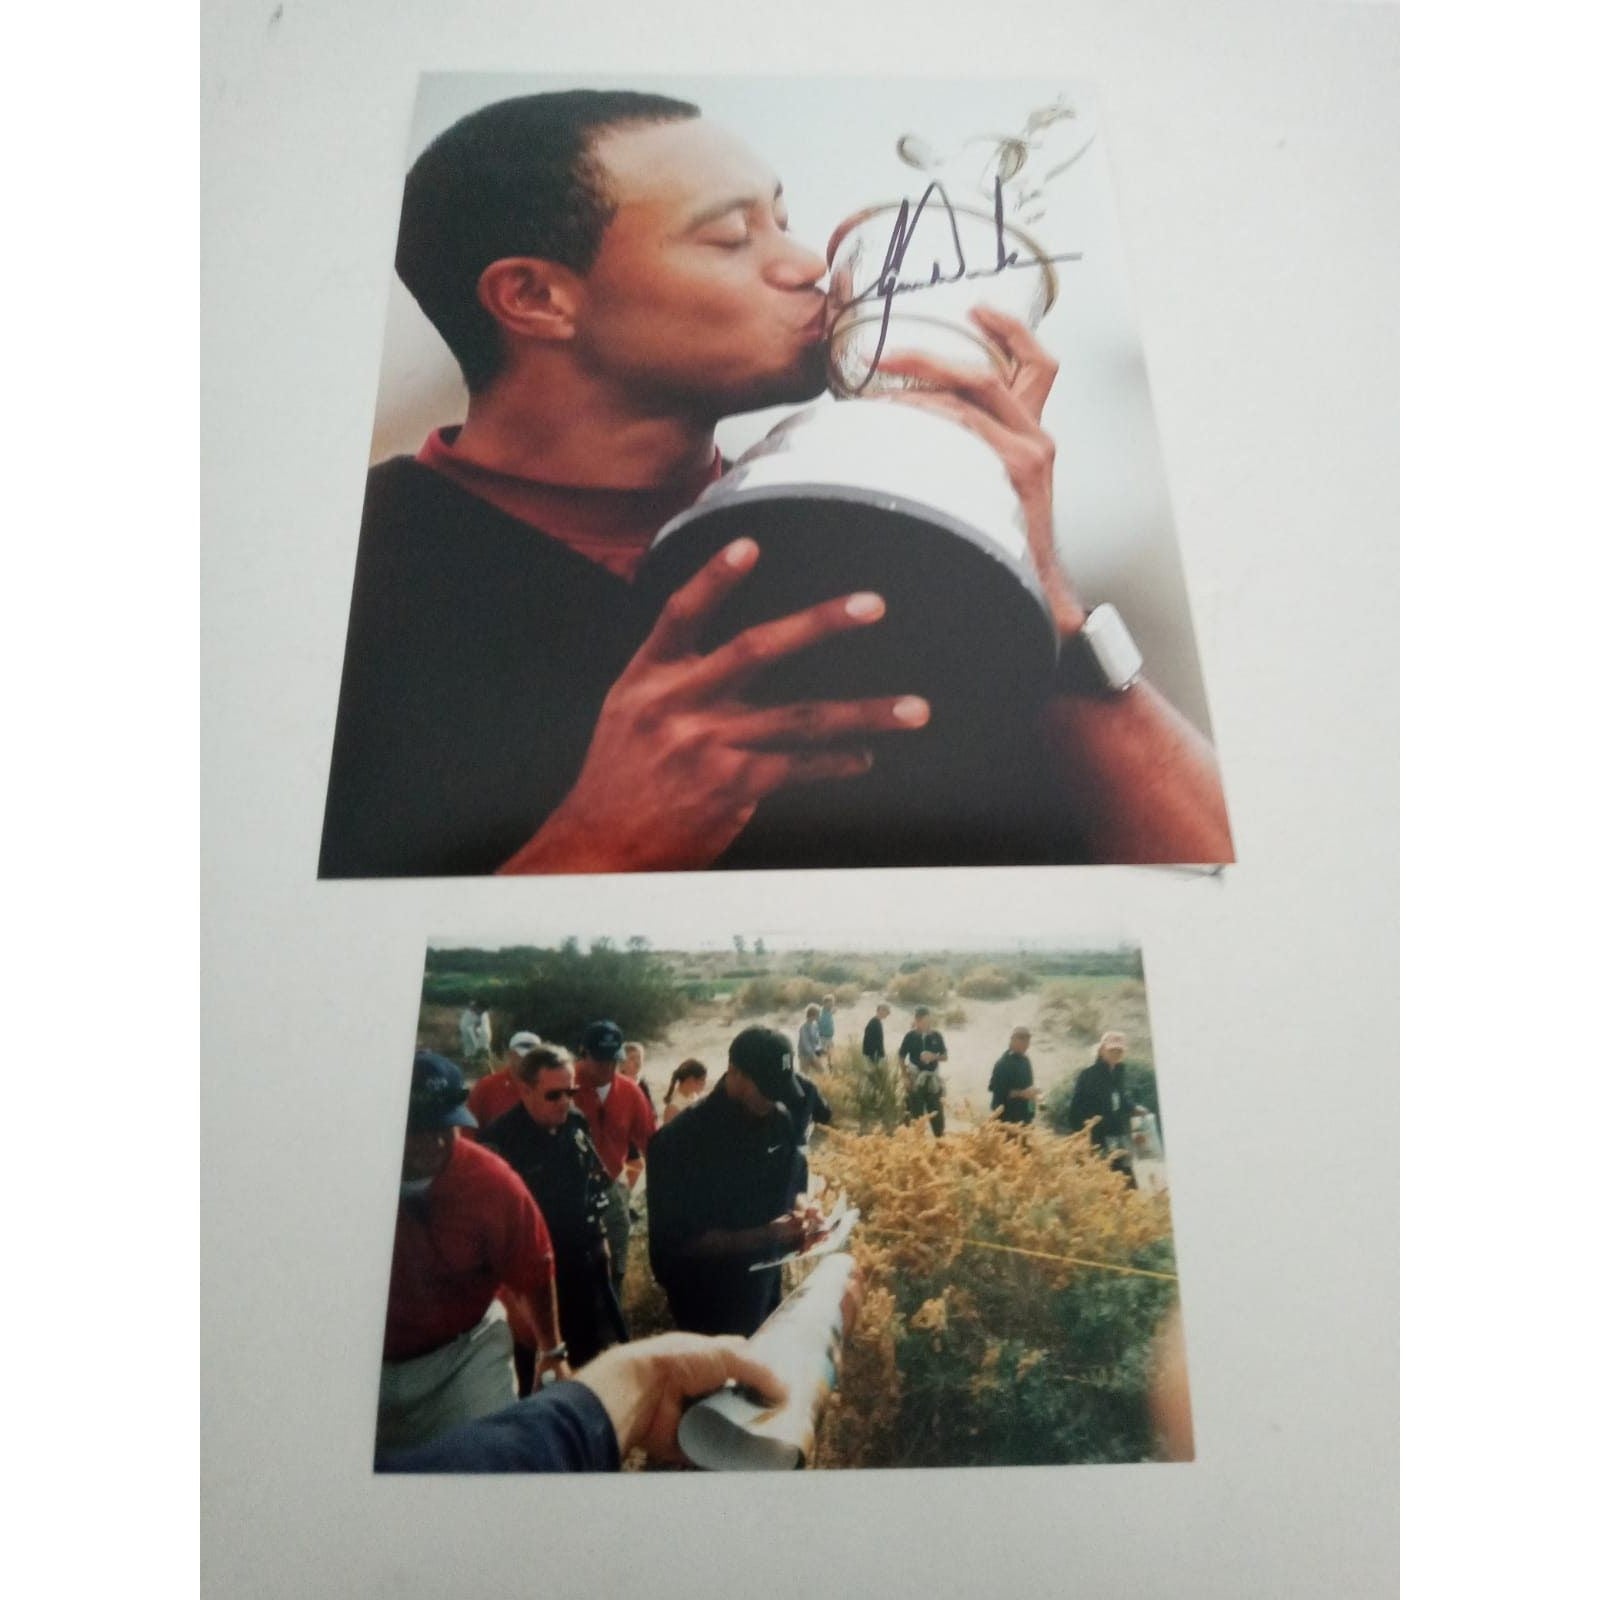 Tiger Woods 8 by 10 signed photo with proof